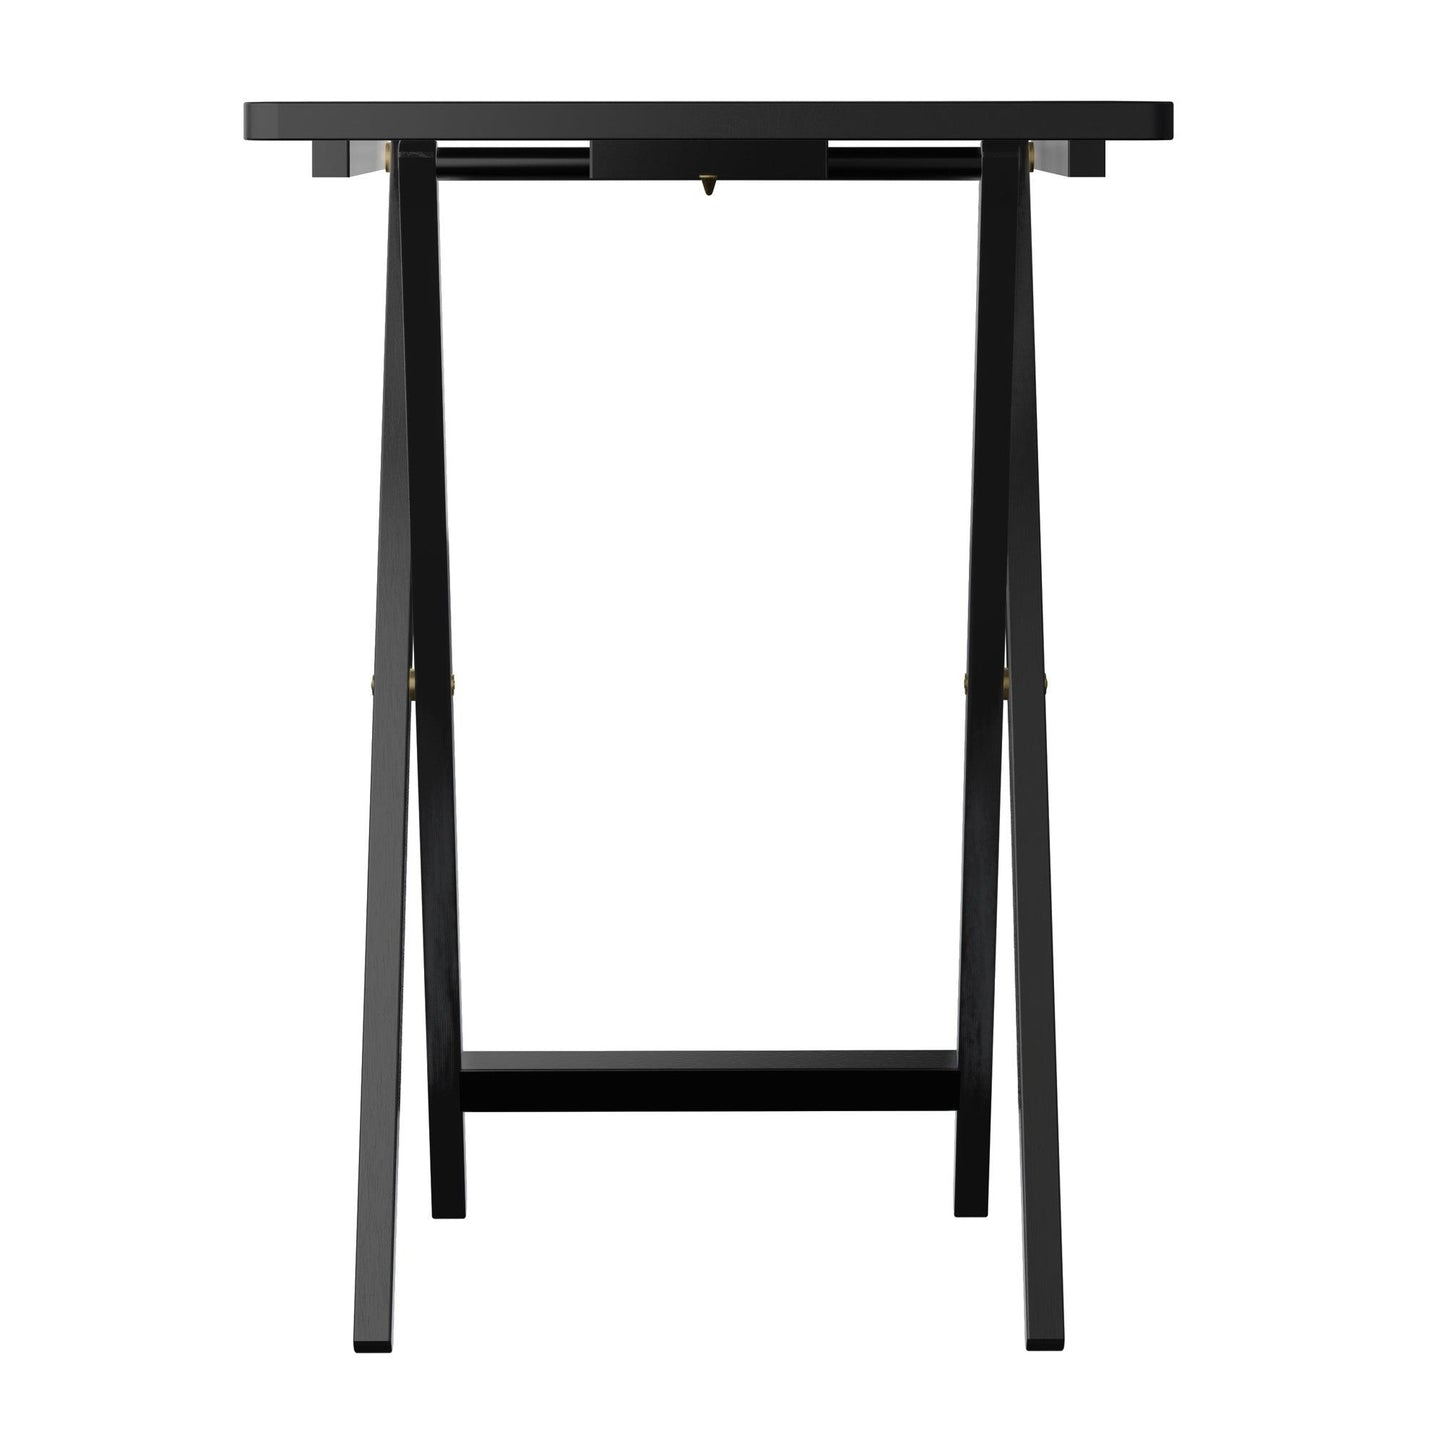 Winsome Alex 5-Pc Snack Table Set, Black, Solid wood FredCo